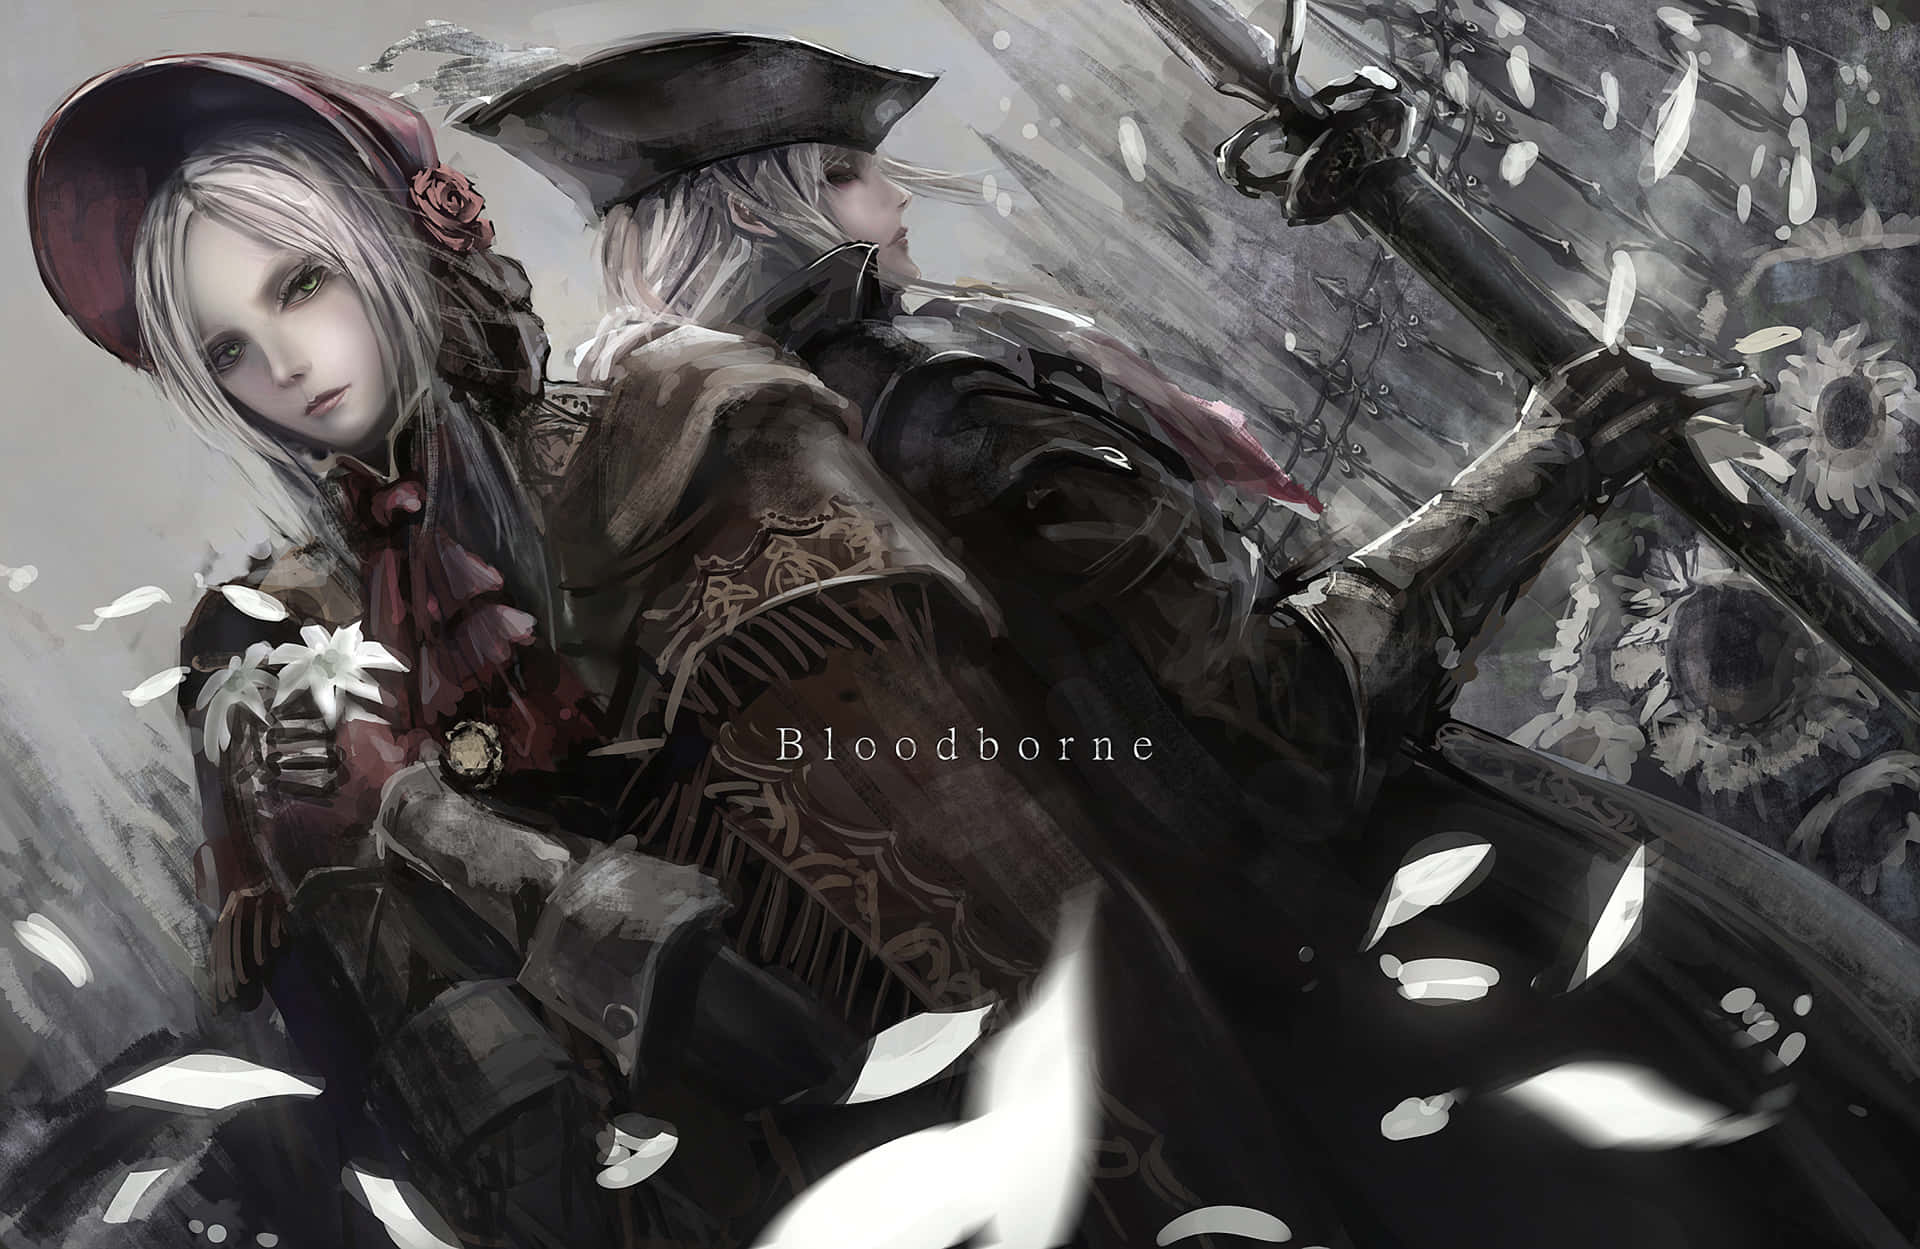 A Hunter Amidst the Haunting Atmosphere of Bloodborne